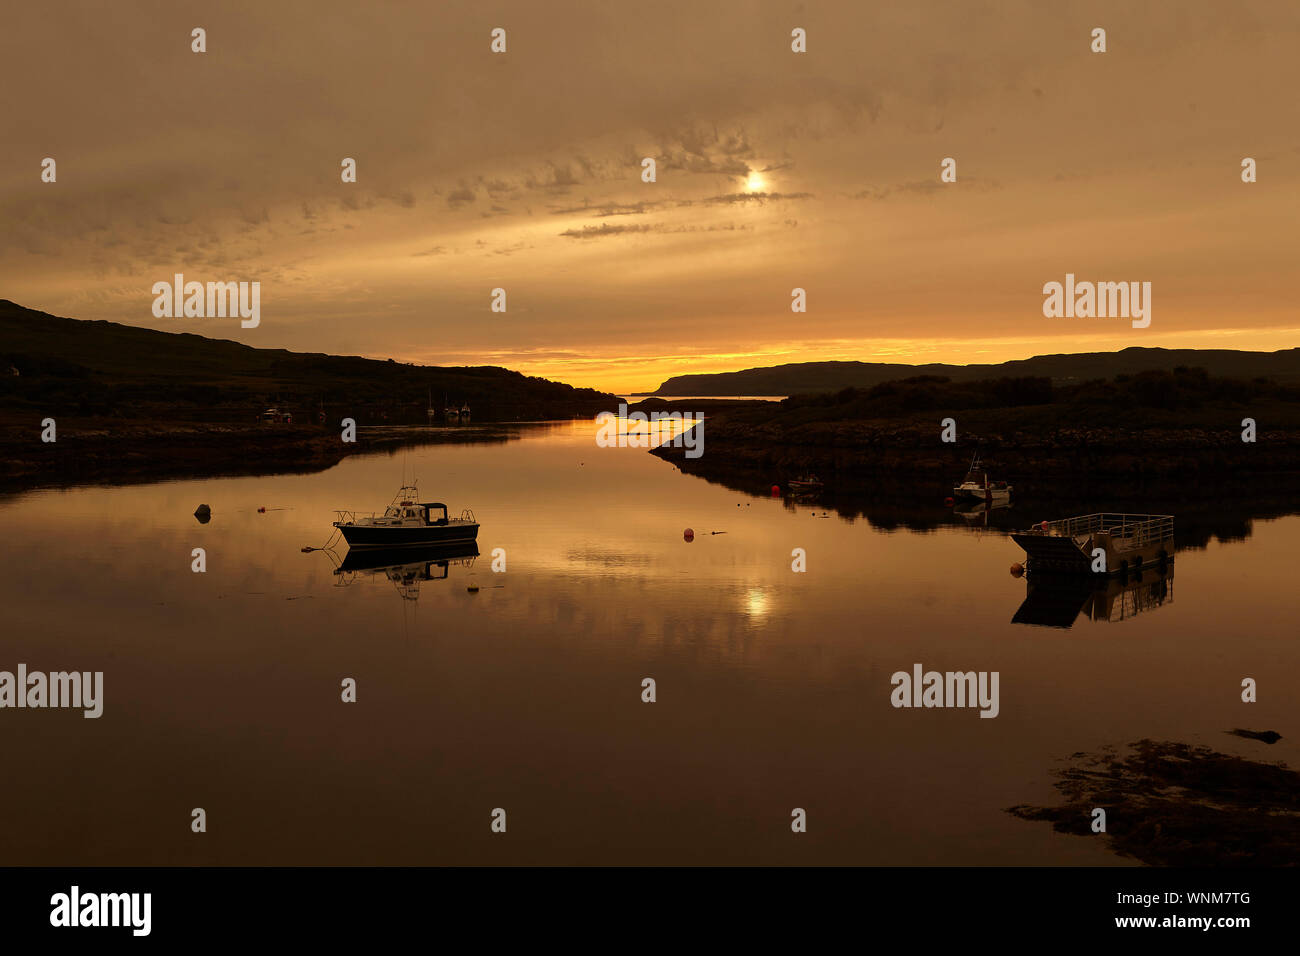 Sunset over Loch Tauth Laggan Bay, Ulva, with fishing boats and buoys, Isle of Mull, Scotland, UK. Stock Photo